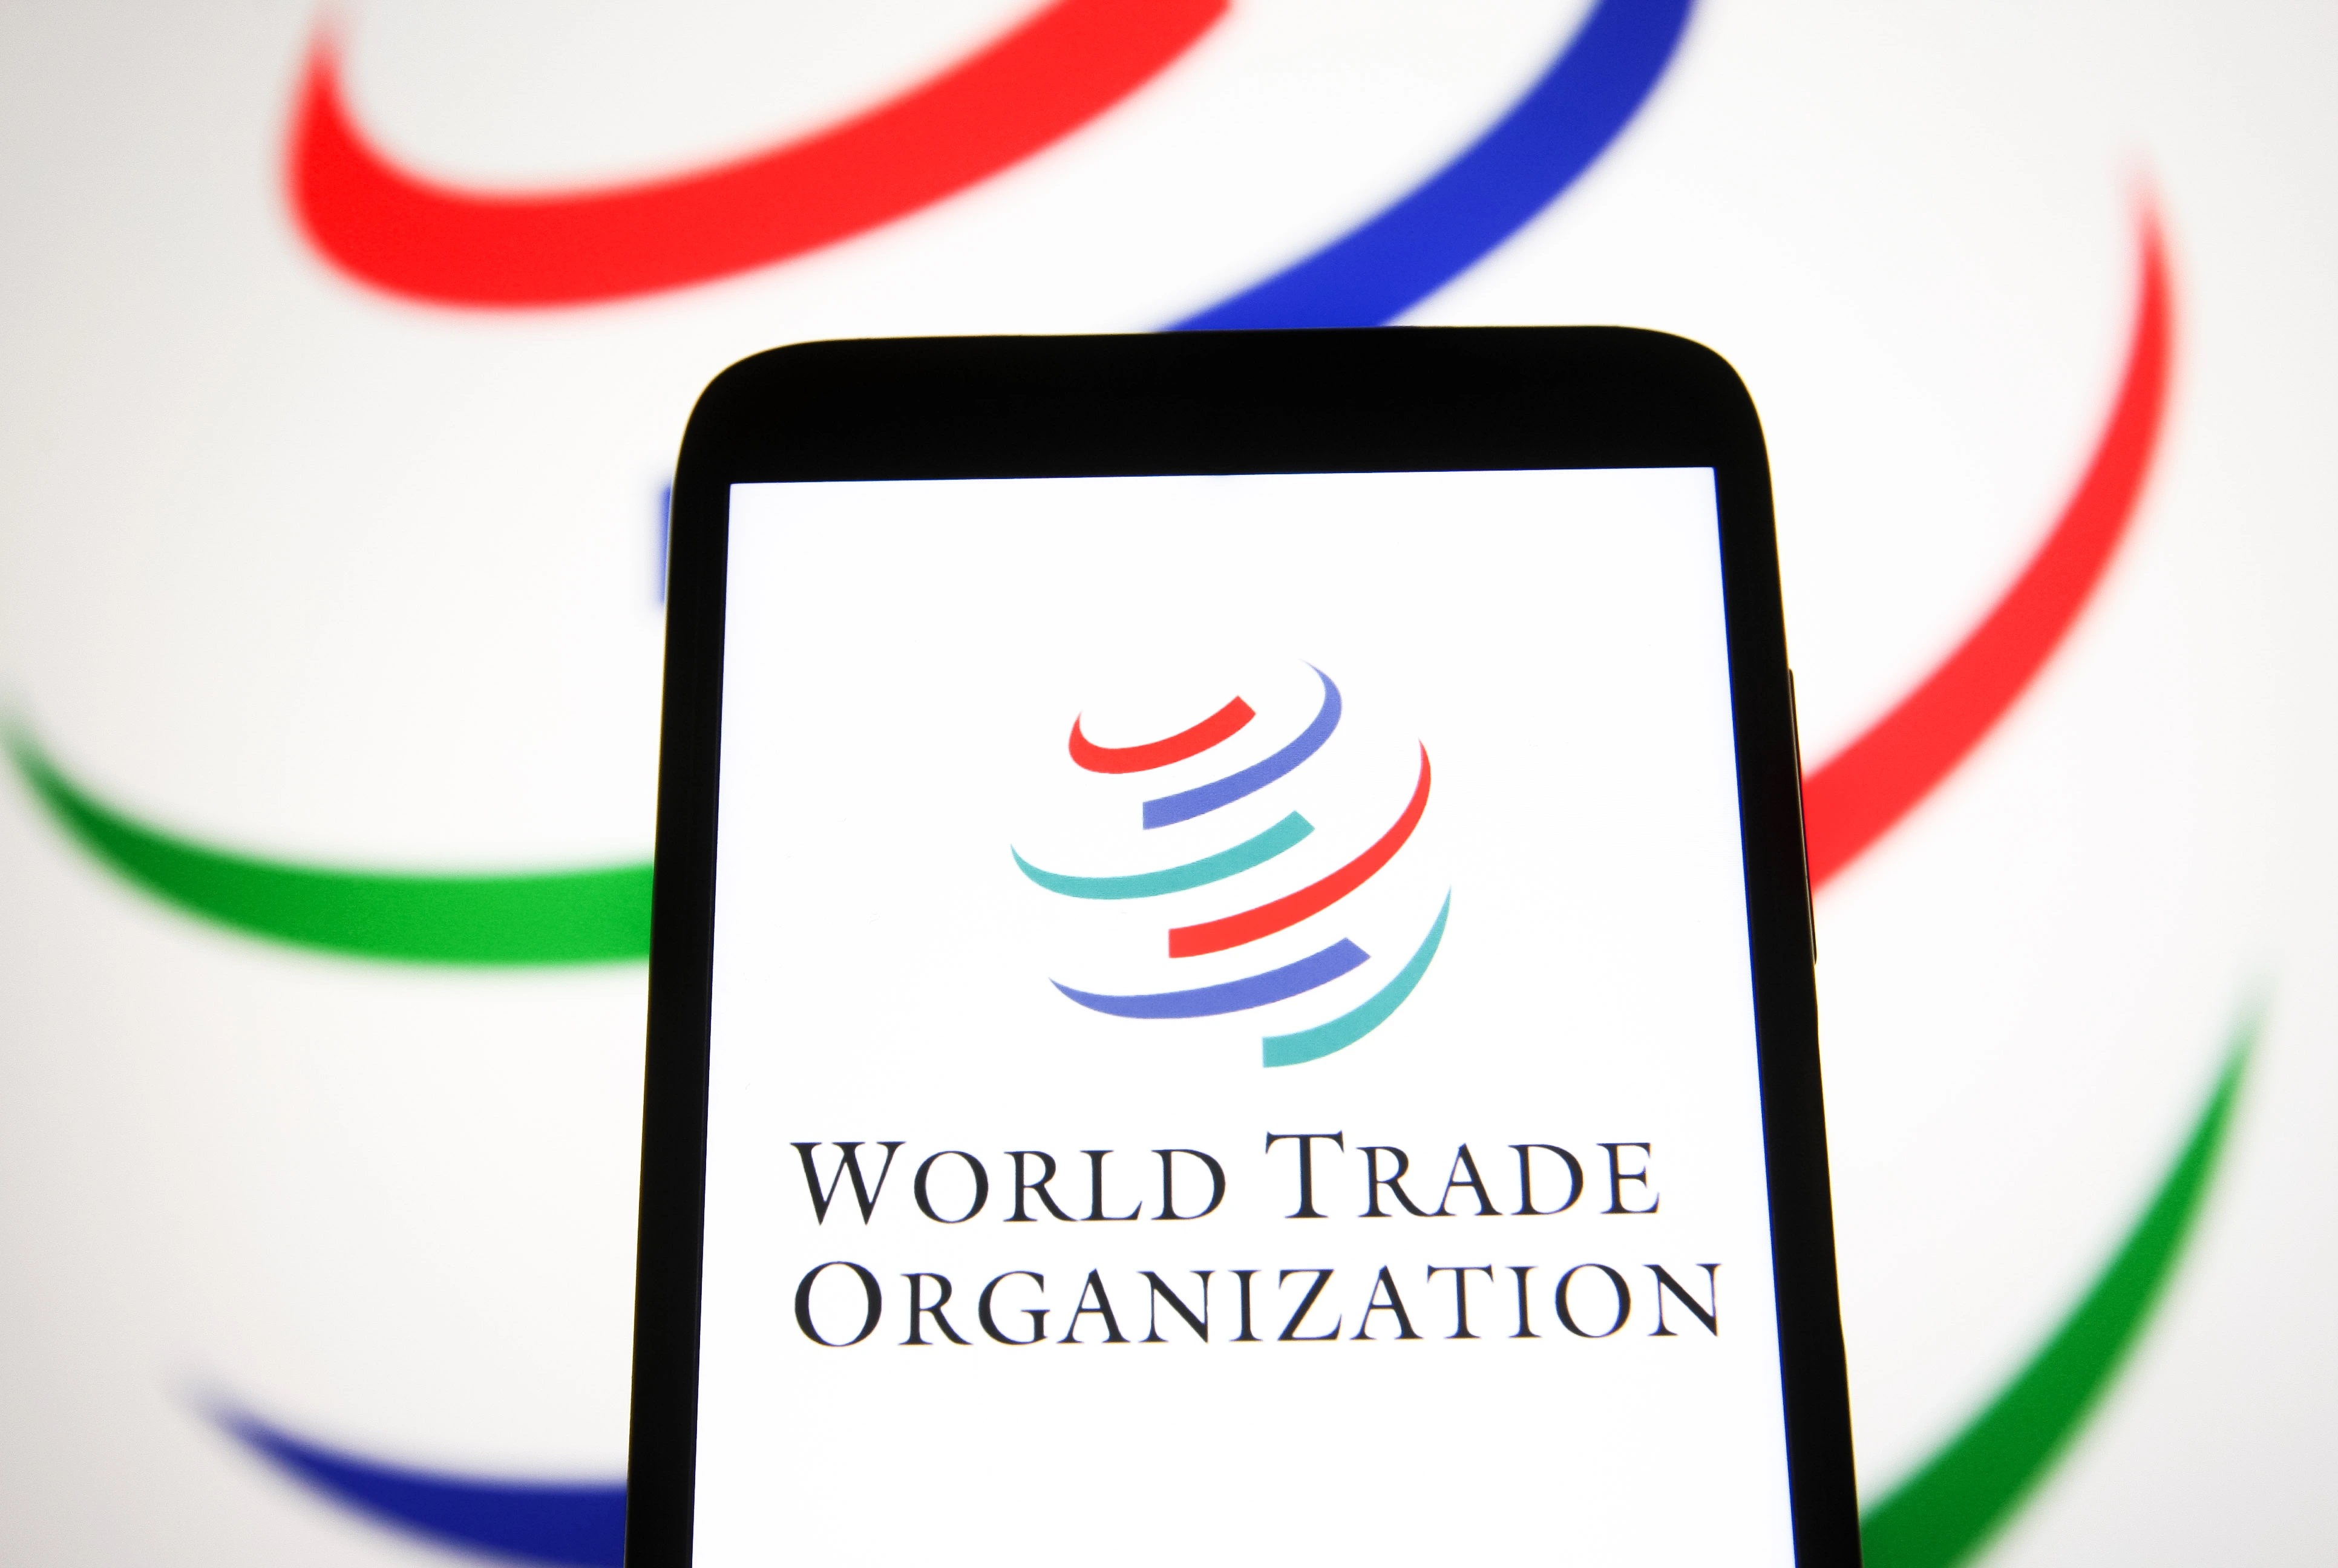 Regulatory norms for e-commerce sector in focus among WTO members